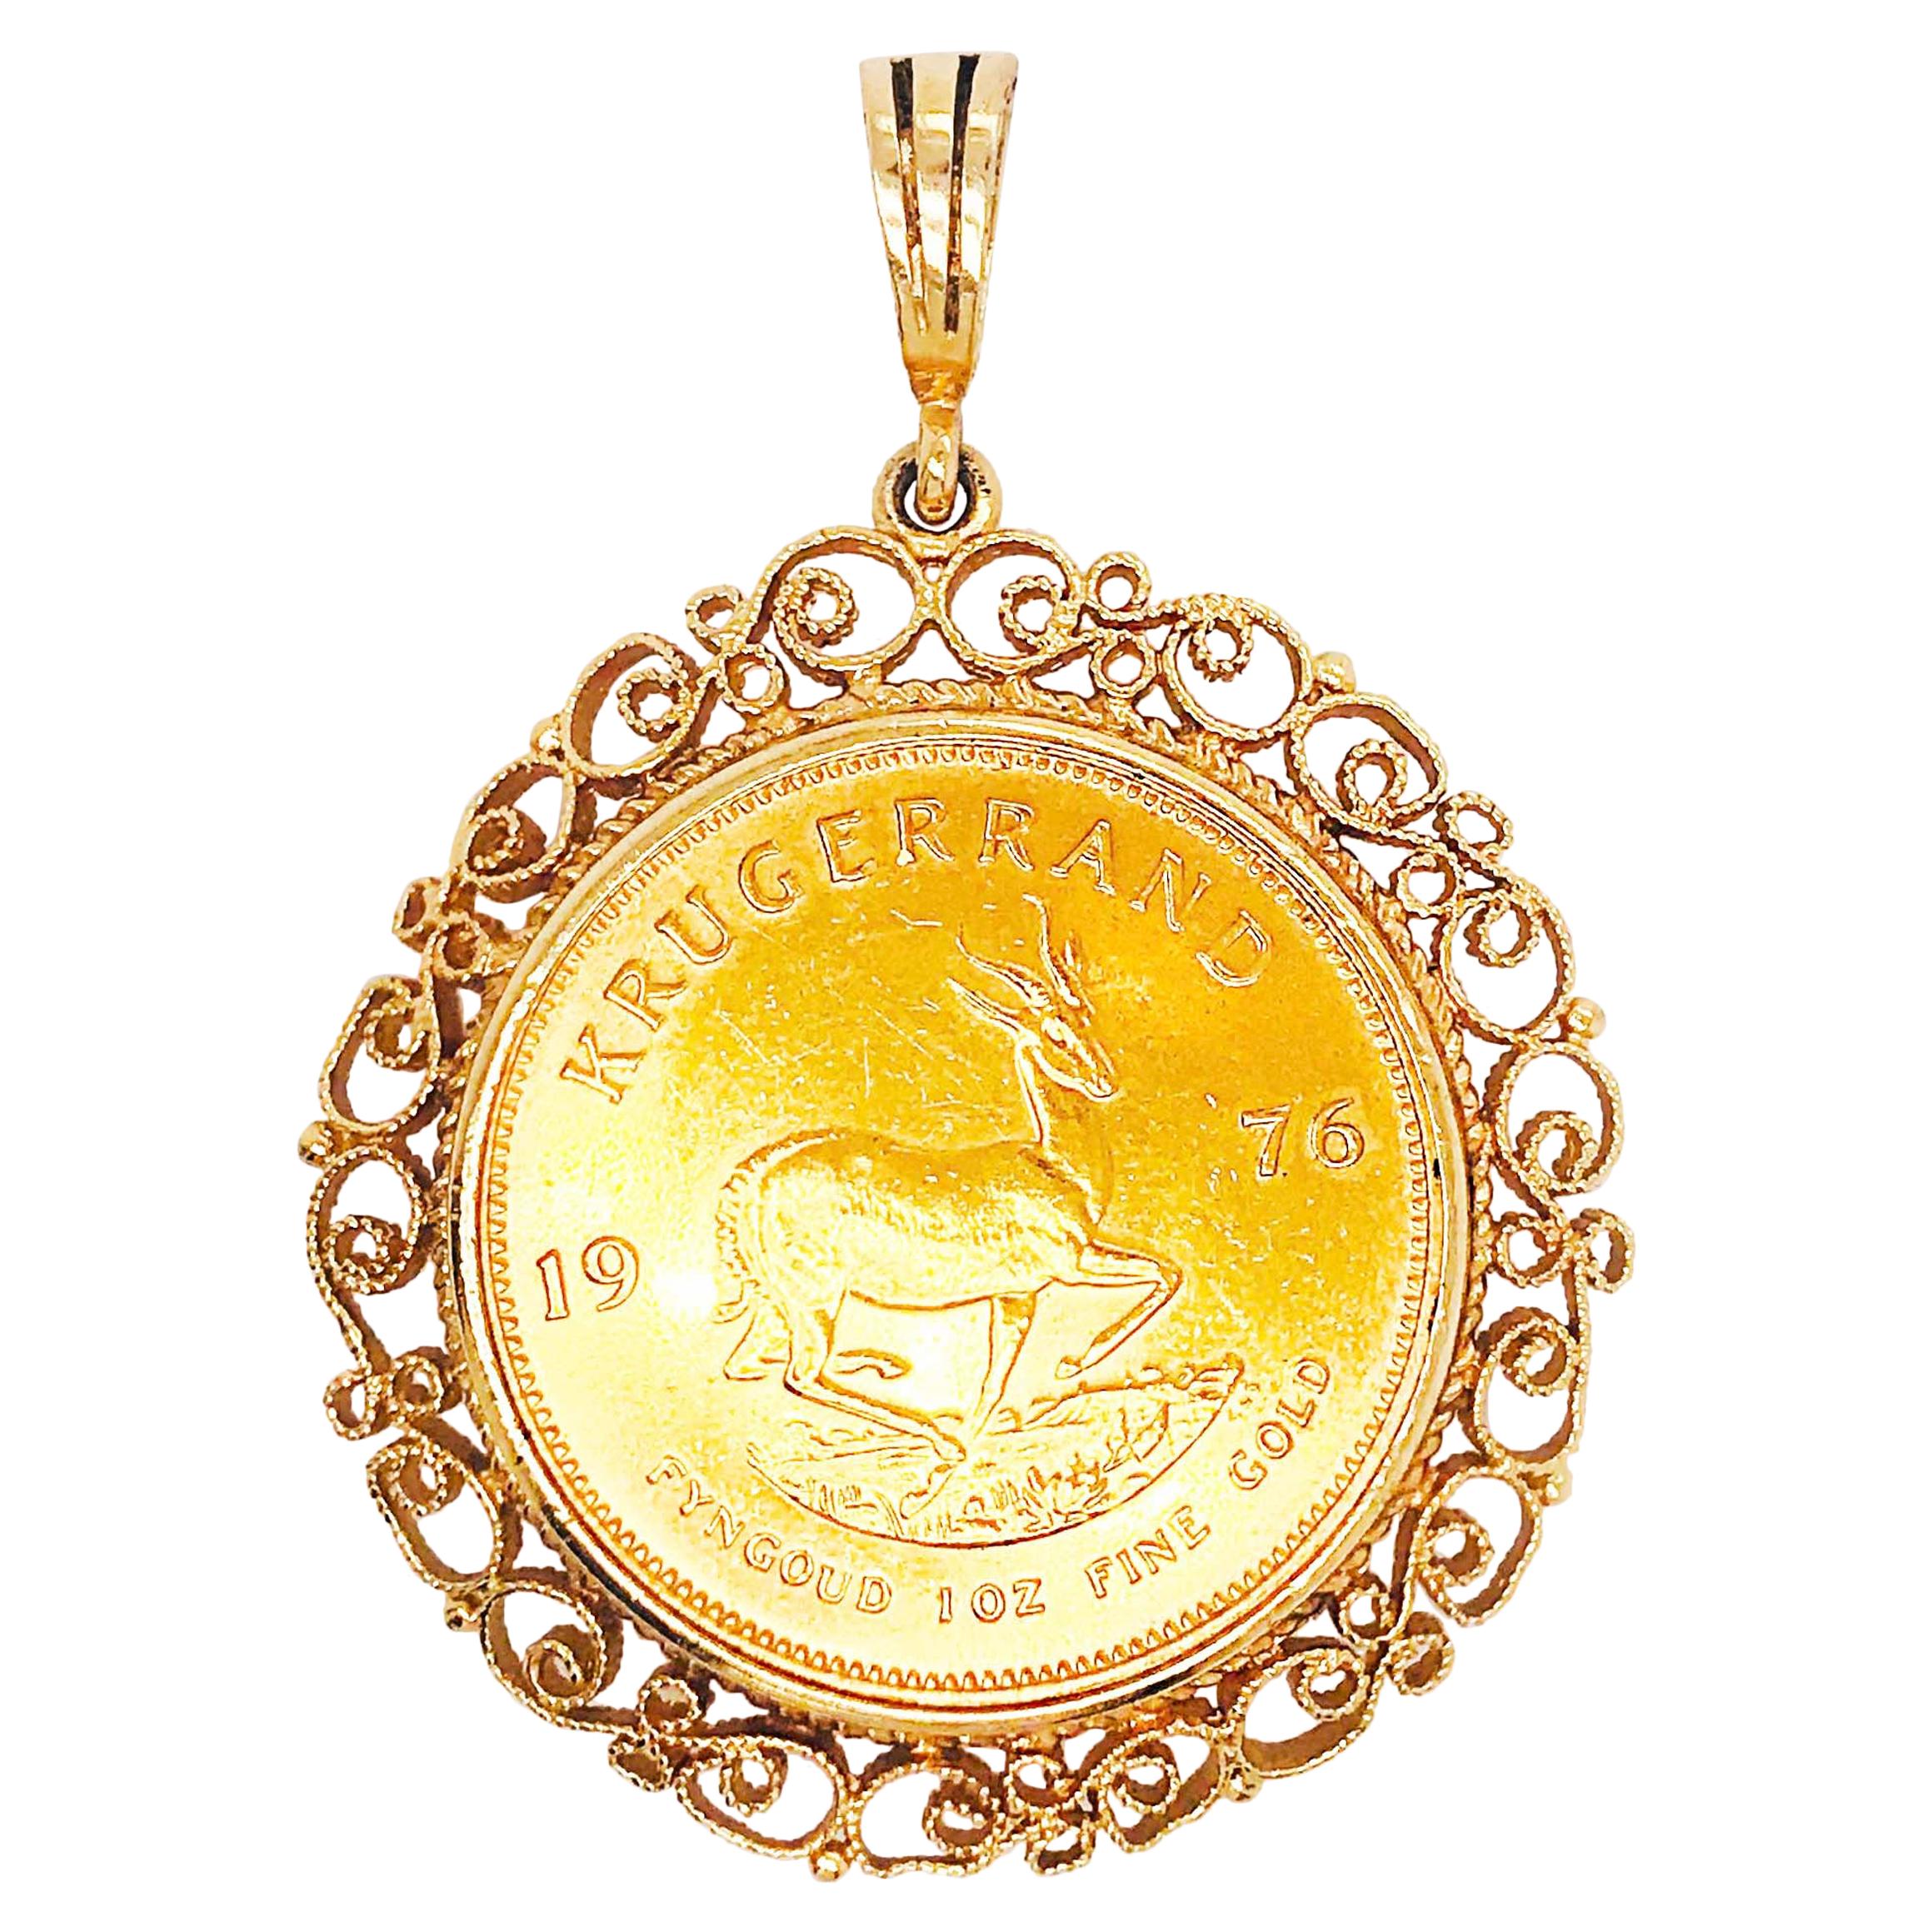 1976 South Africa 1 oz Krugerrand Gold Coin with Custom Gold Lace Filigree Bezel